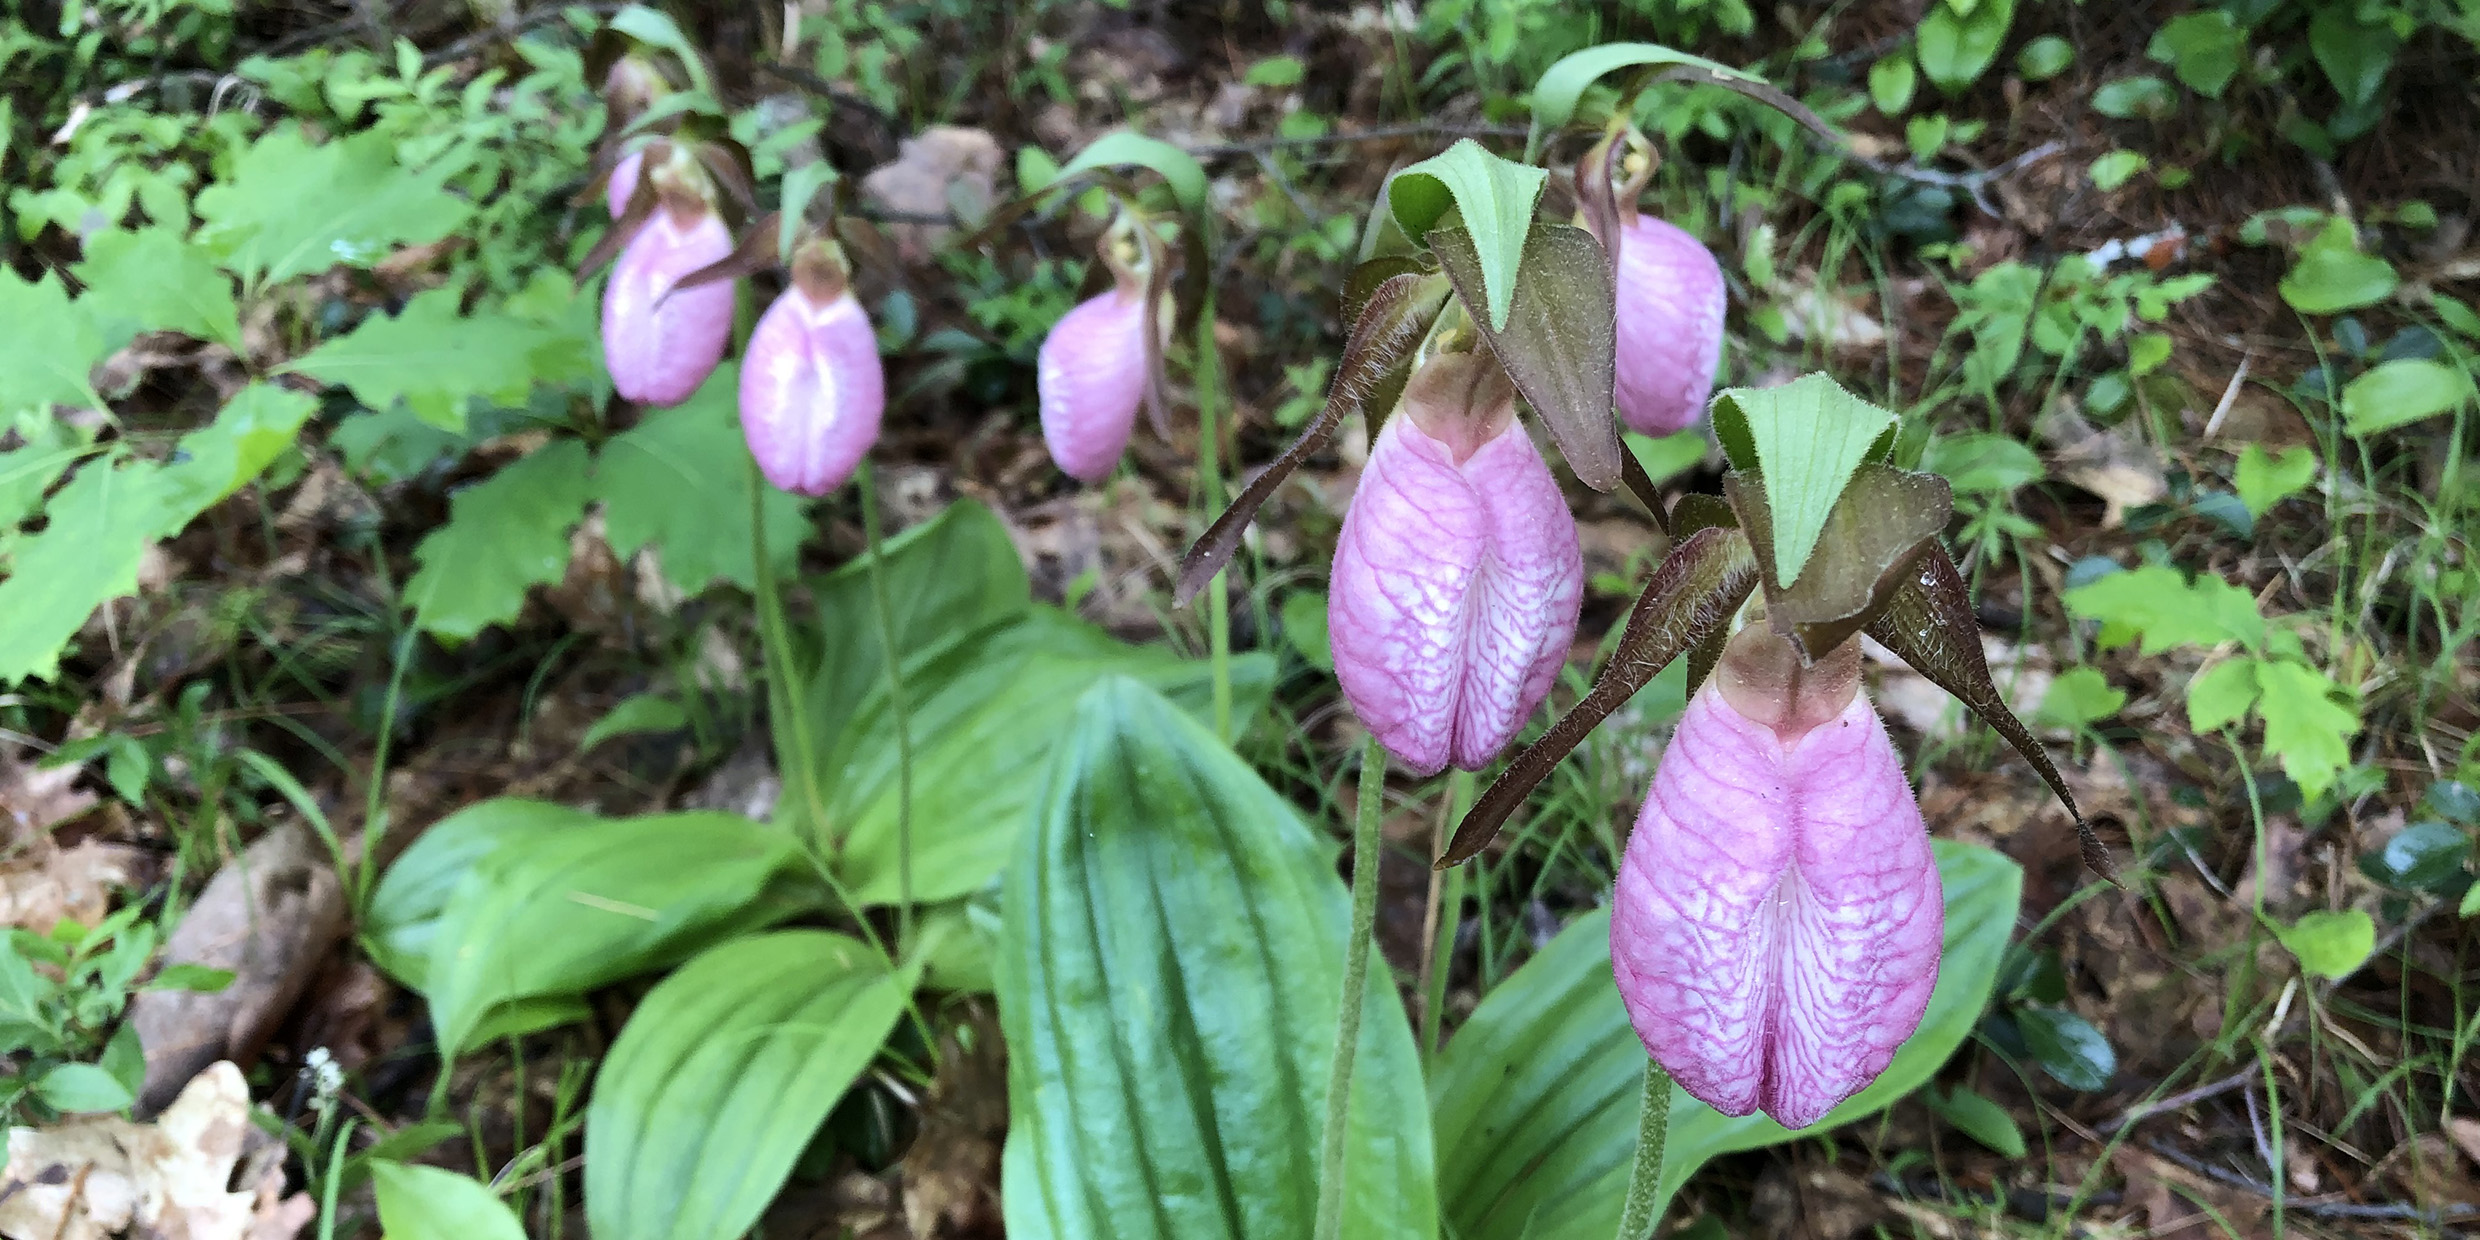 Image of pink lady's slipper